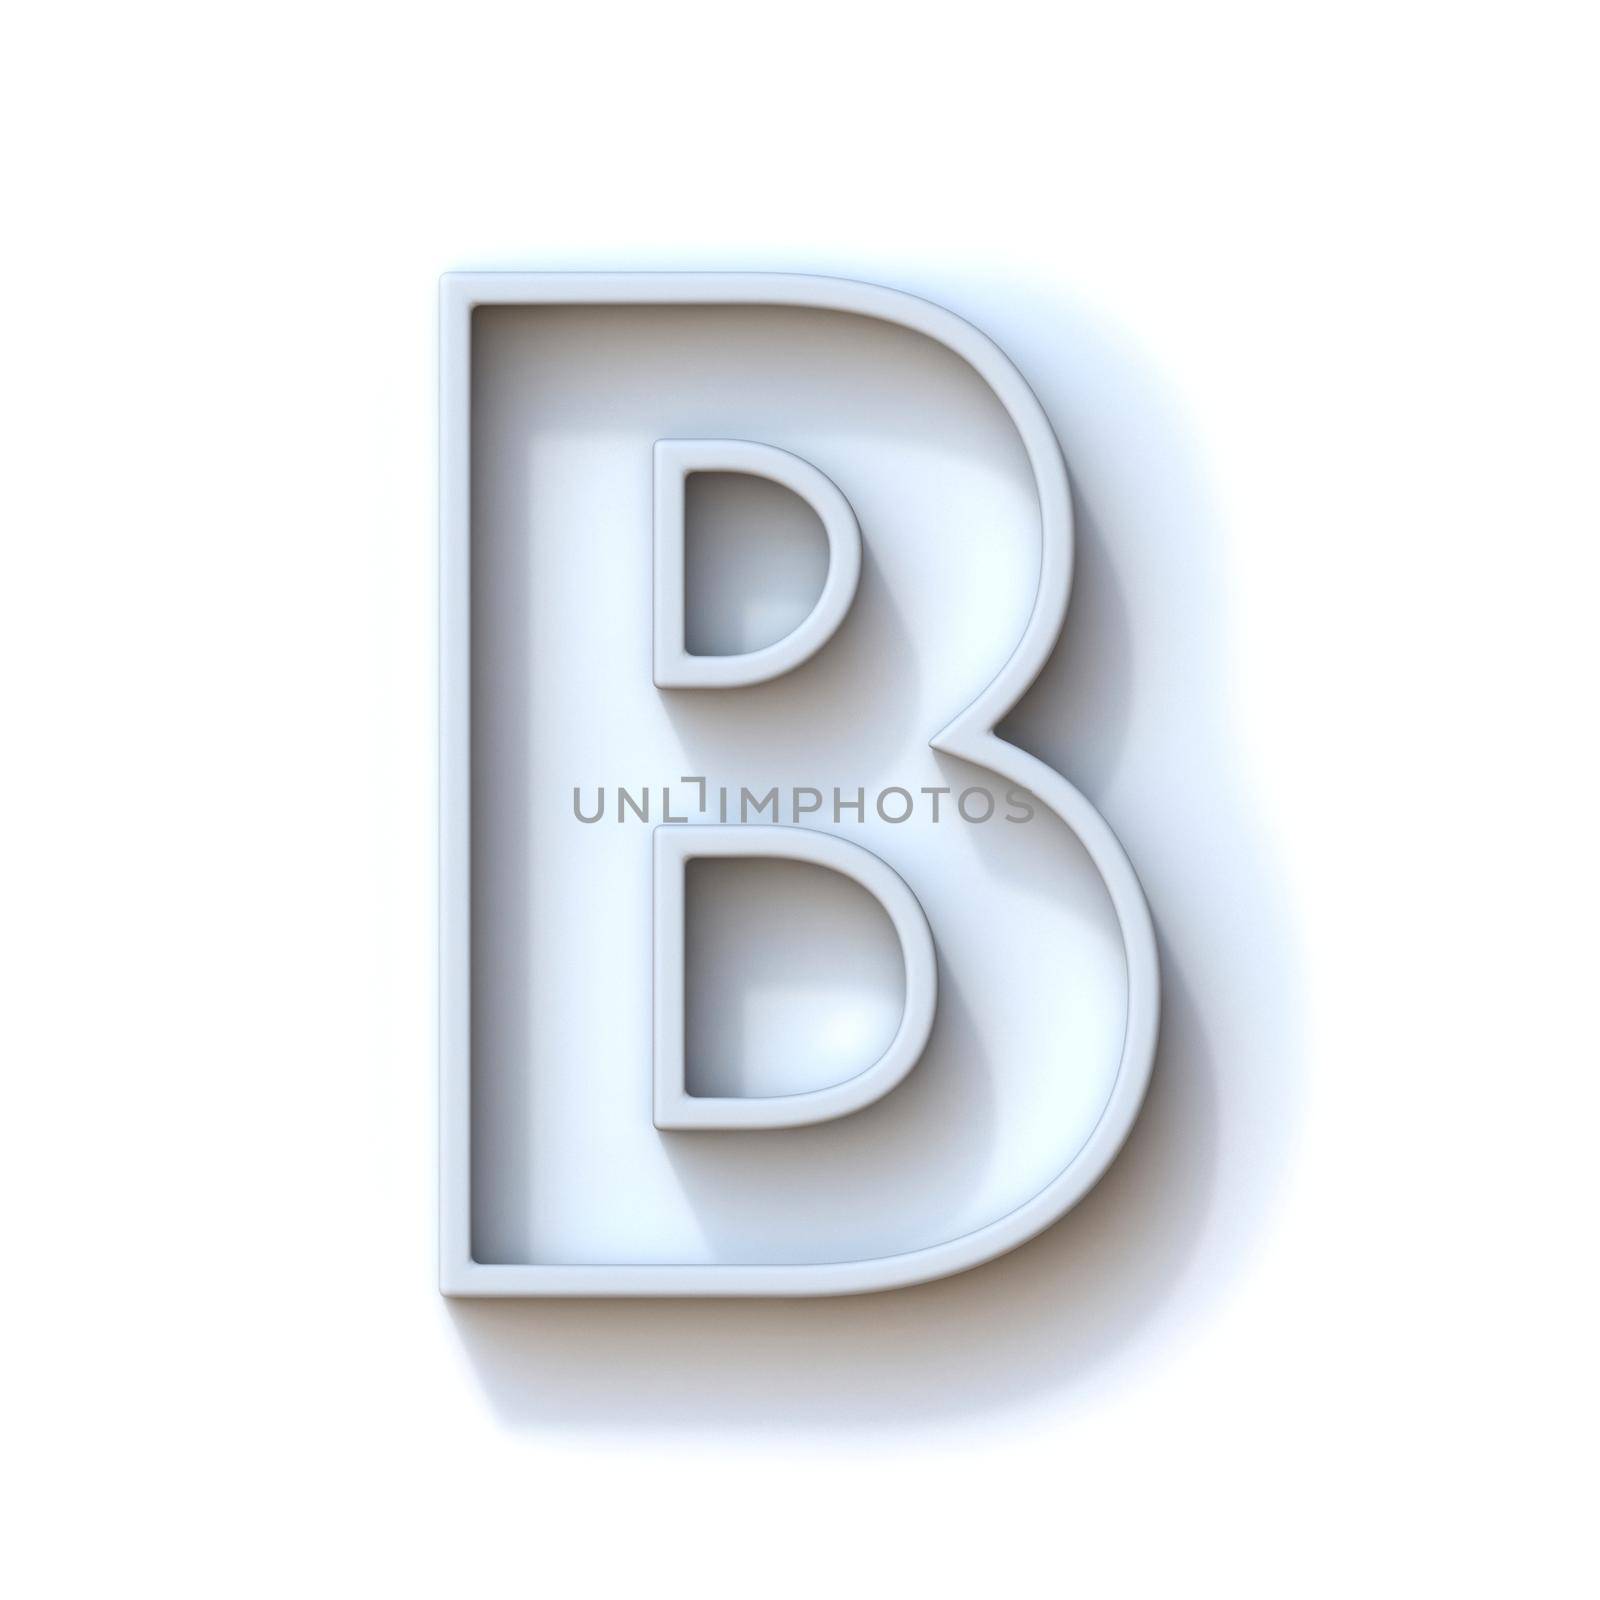 Grey extruded outlined font with shadow Letter B 3D rendering illustration isolated on white background